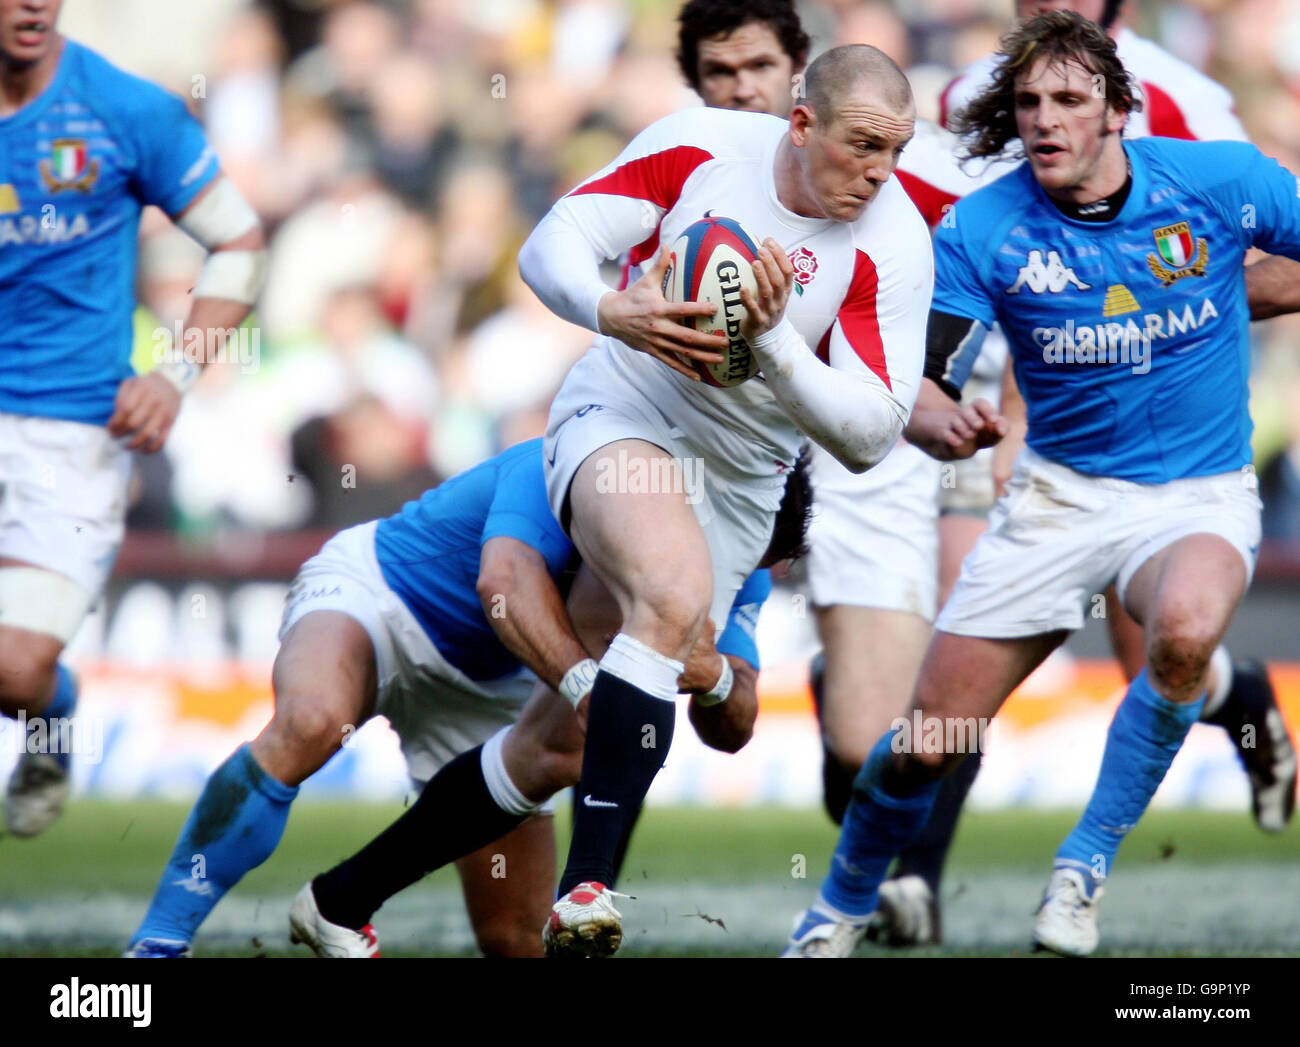 Rugby Union - RBS 6 Nations Championship 2007 - England v Italy - Twickenham. England's Mike Tindall (centre) makes a break against Italy's defence during the RBS 6 Nations match at Twickenham, London. Stock Photo